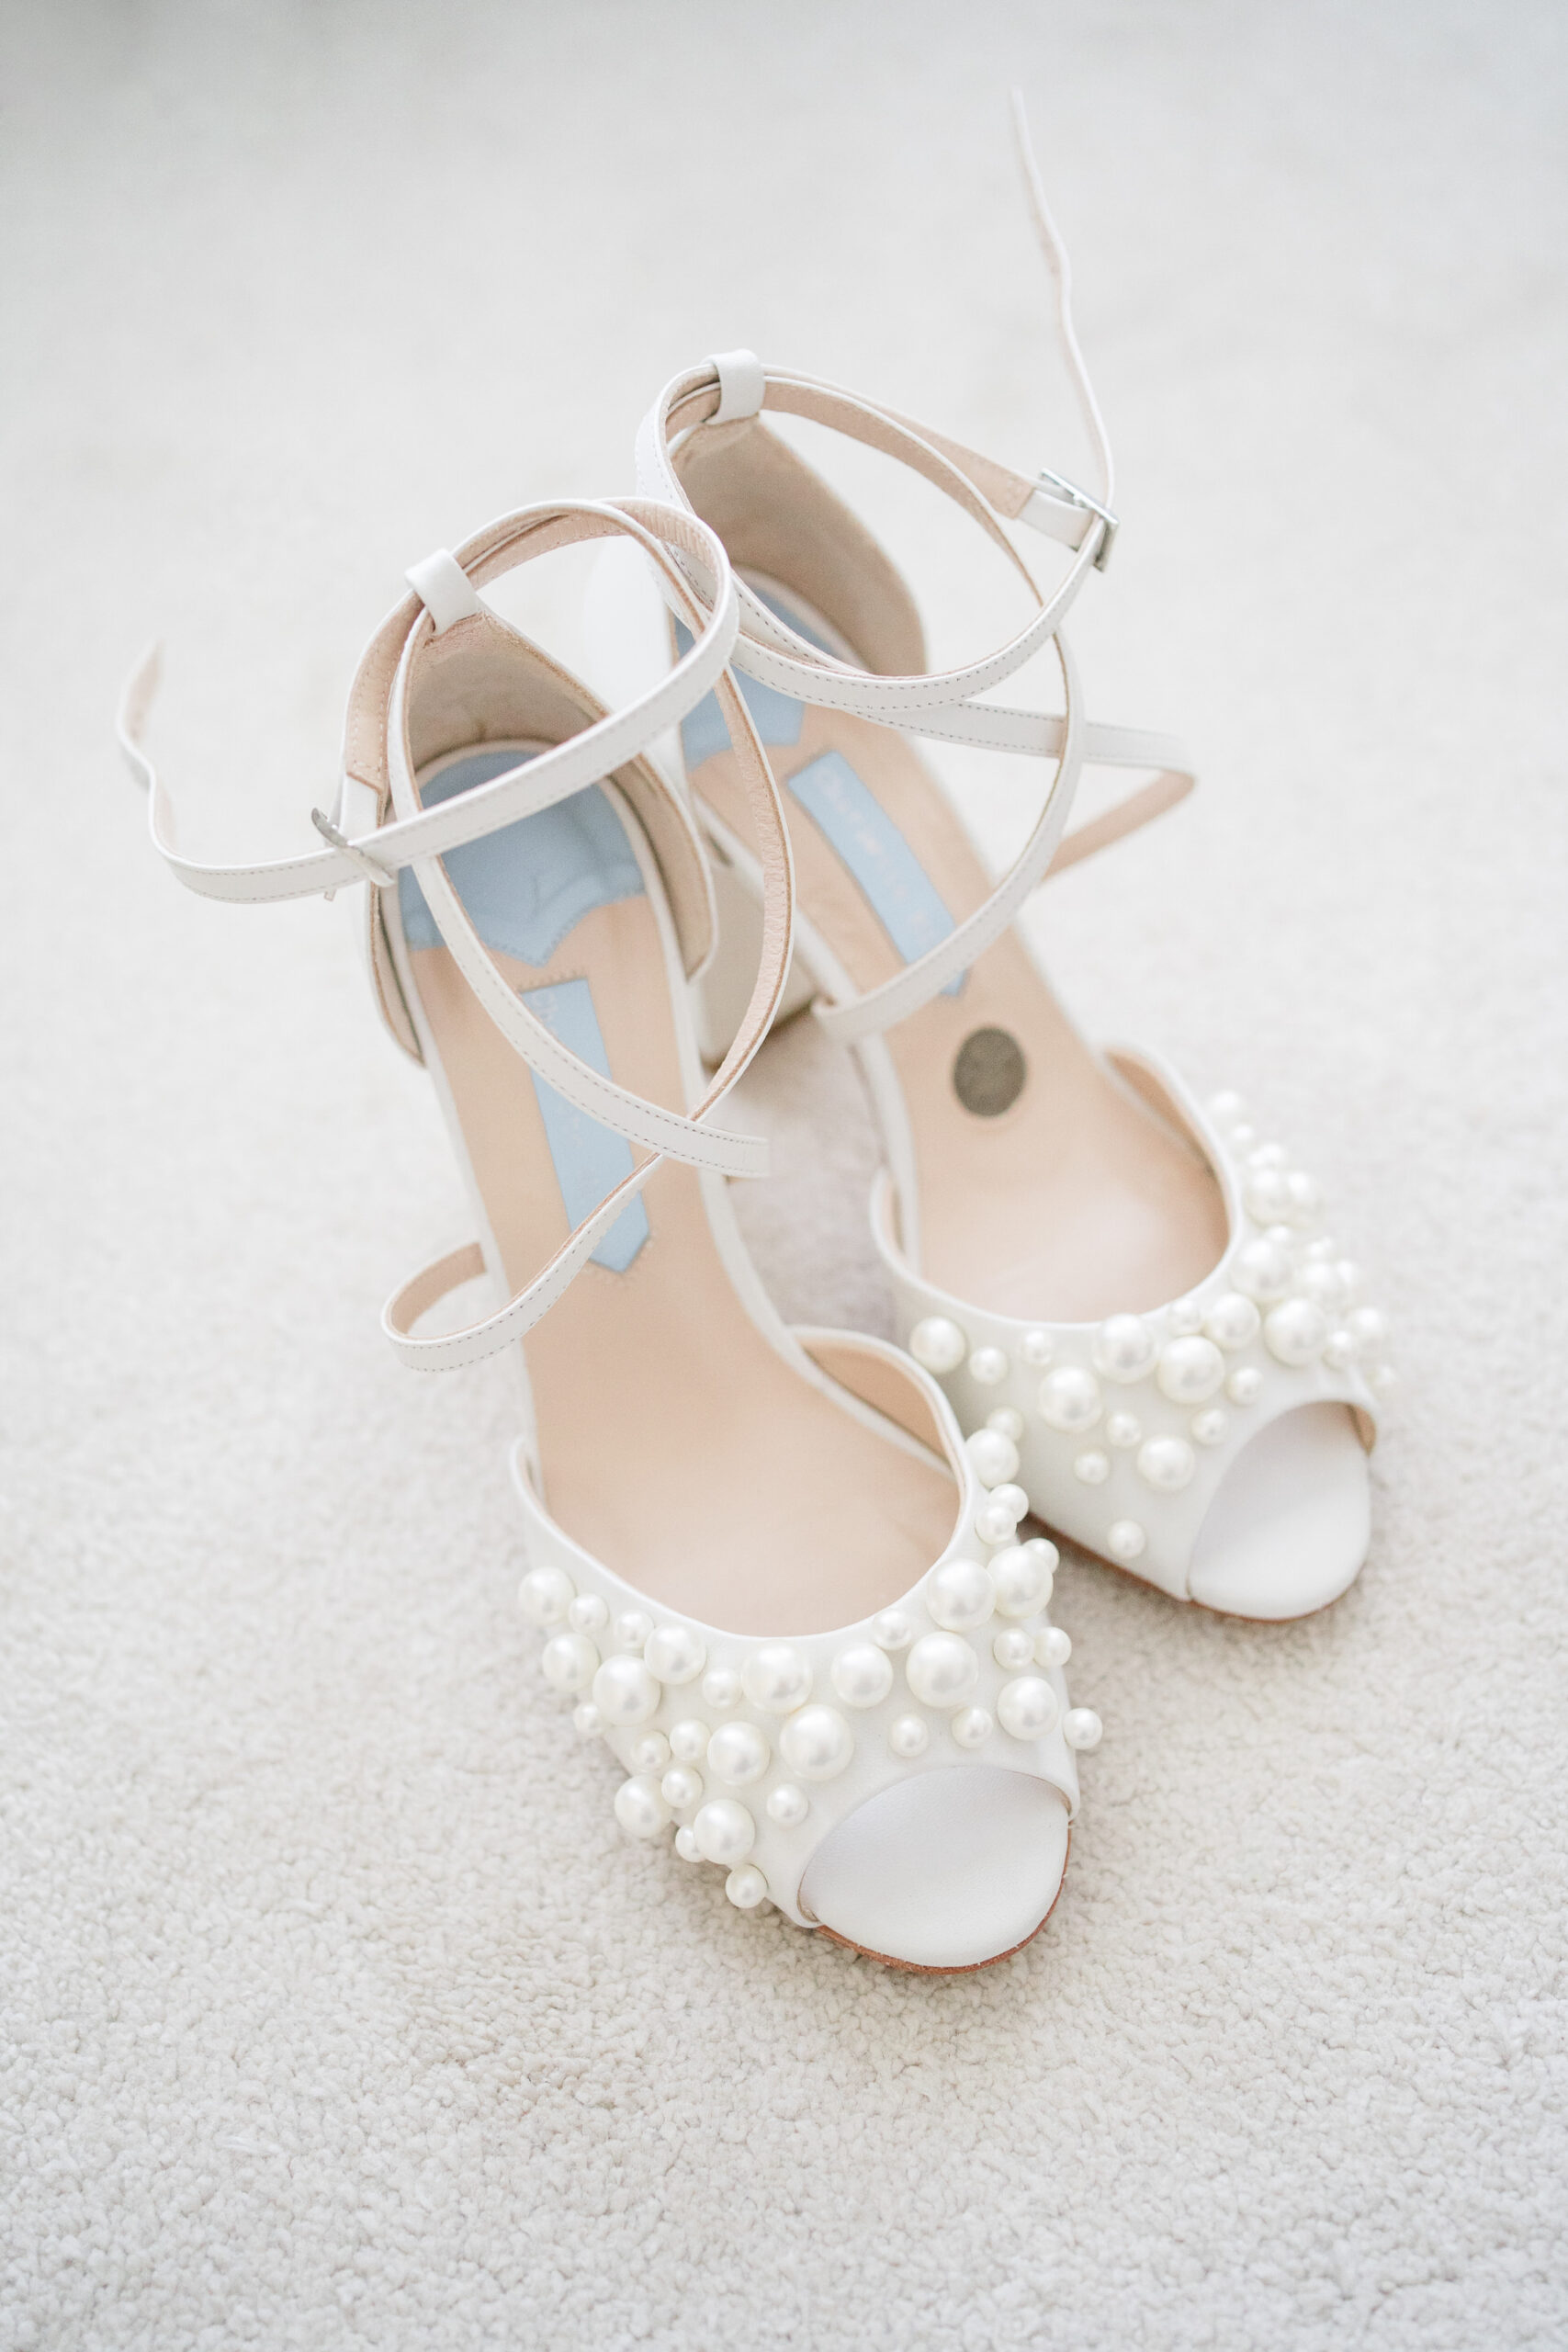 Charlotte mills wedding shoes with pearls